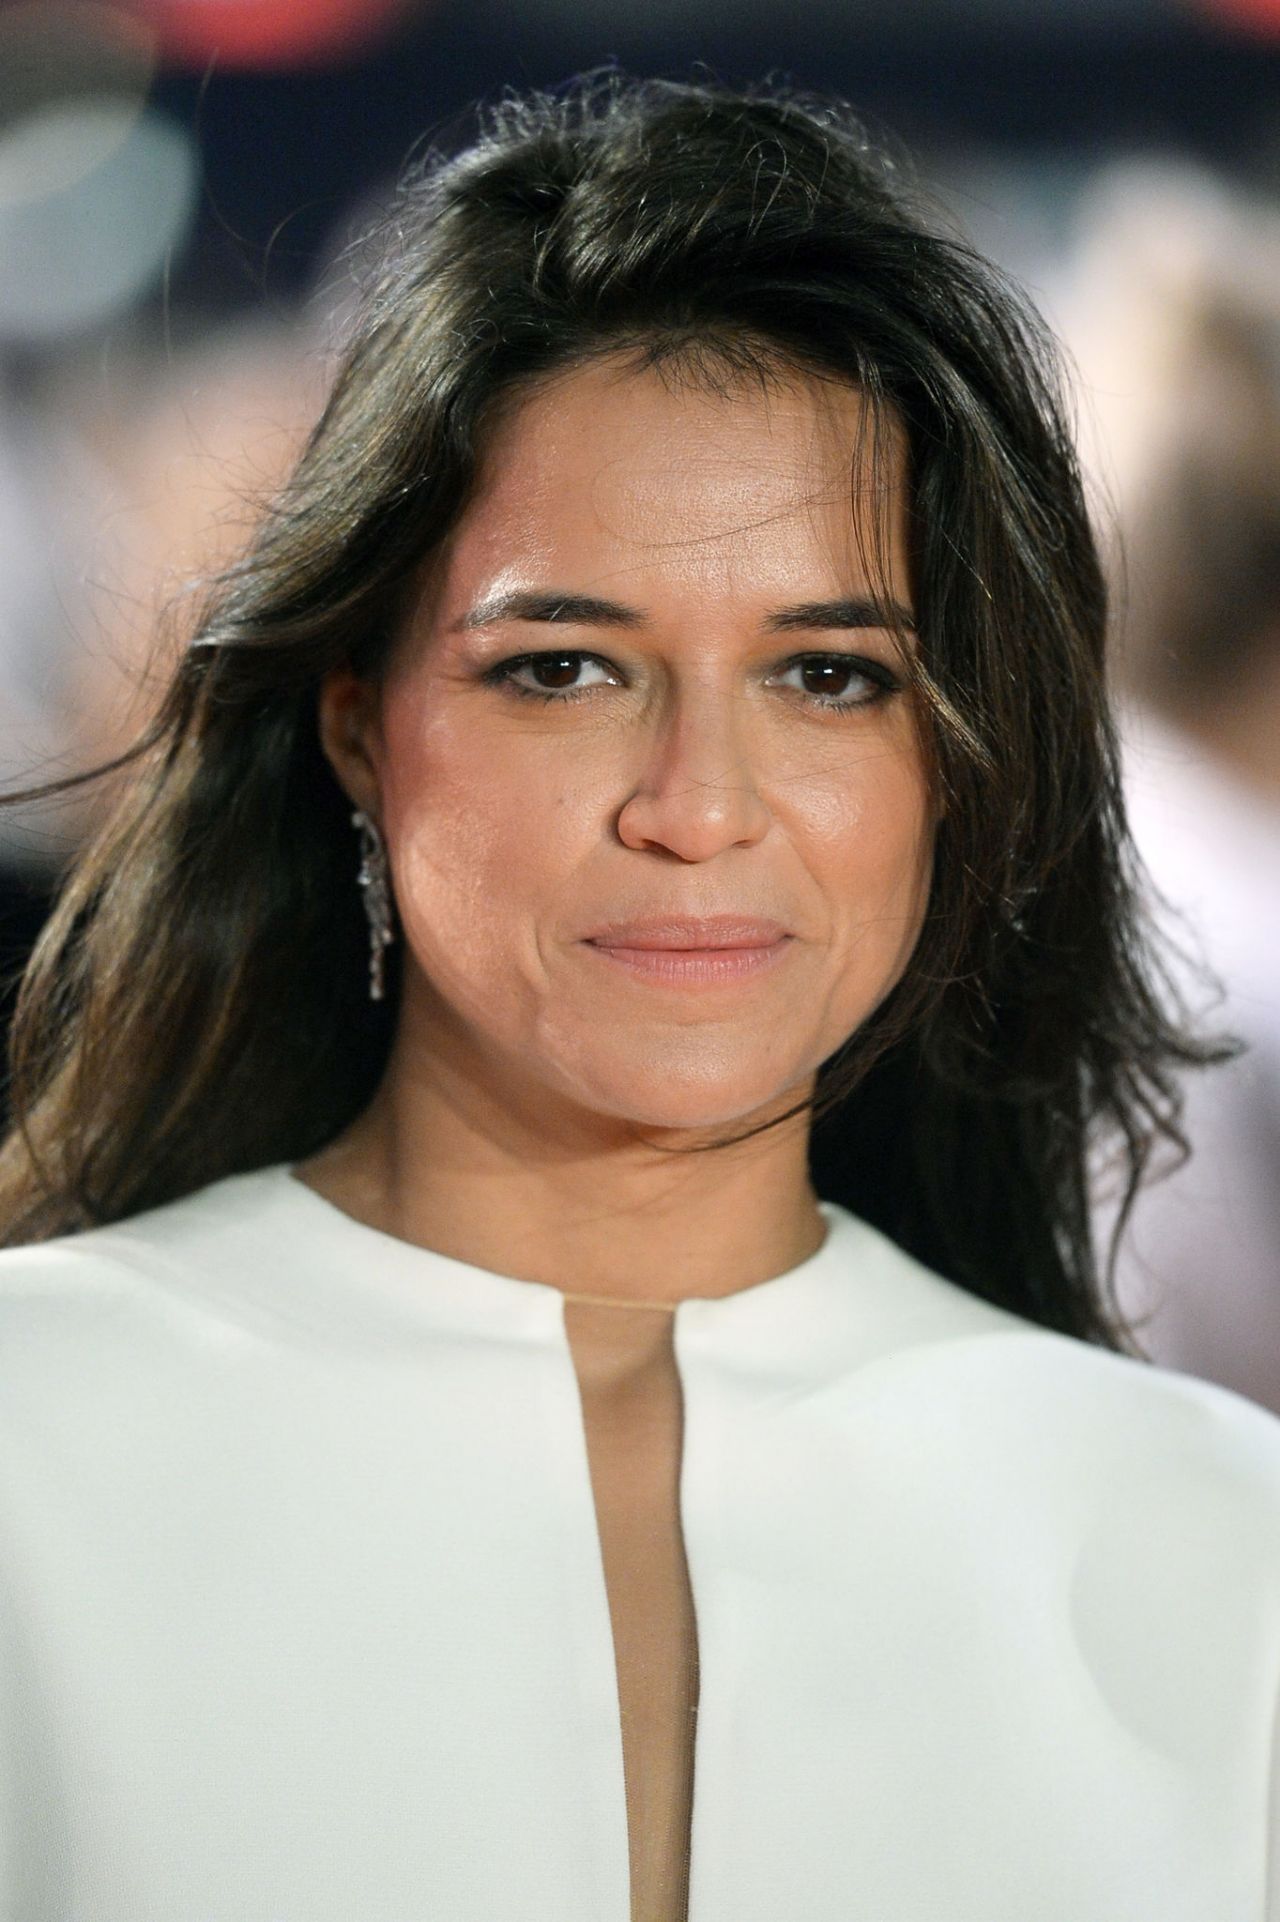 michelle-rodriguez-widows-europe-premiere-and-opening-night-gala-of-the-62nd-bfi-london-film-festival-9.jpg